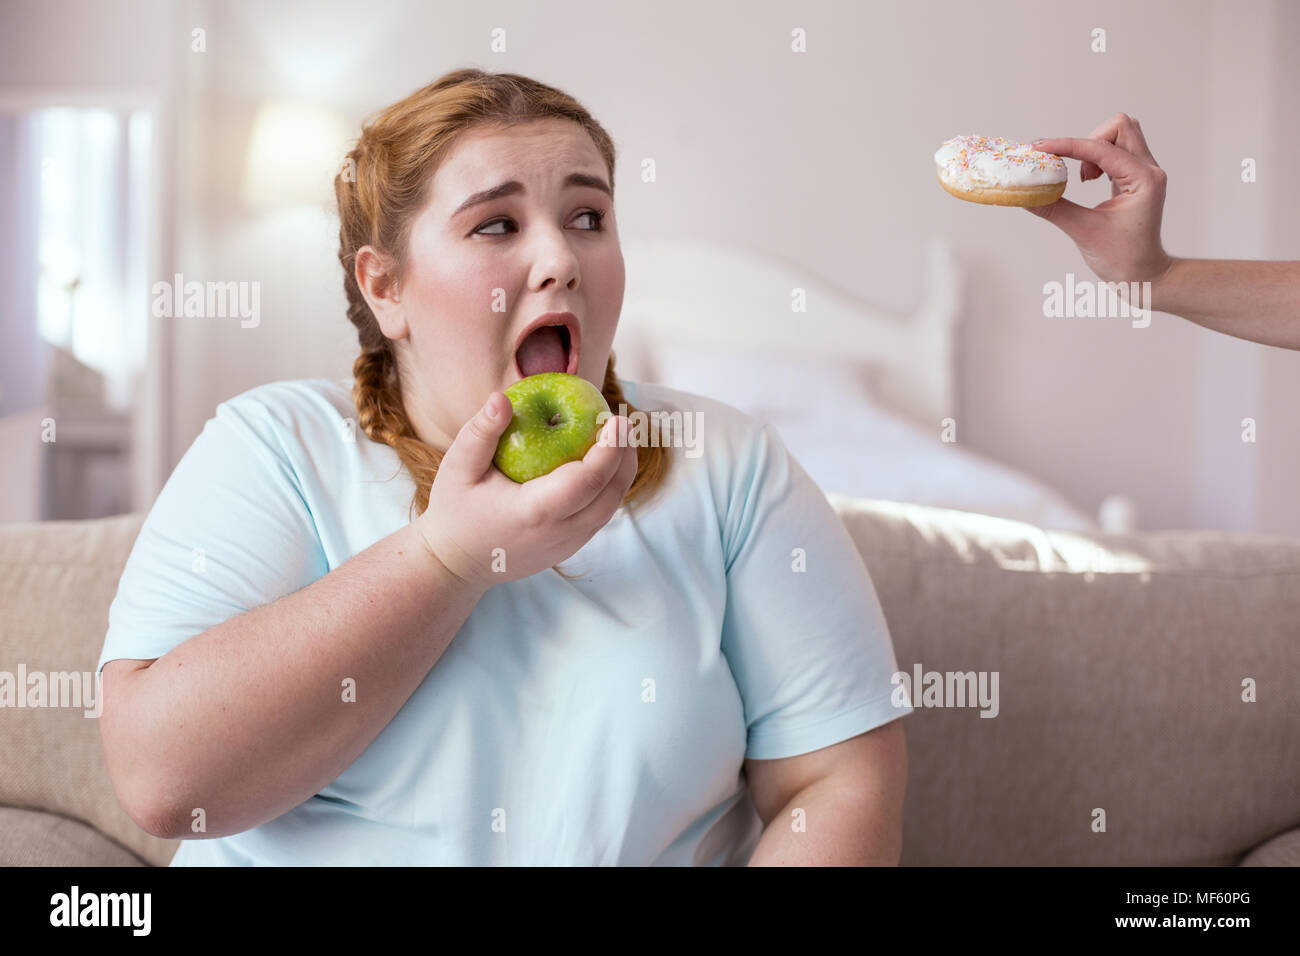 Plump woman eating appealing apple Stock Photo